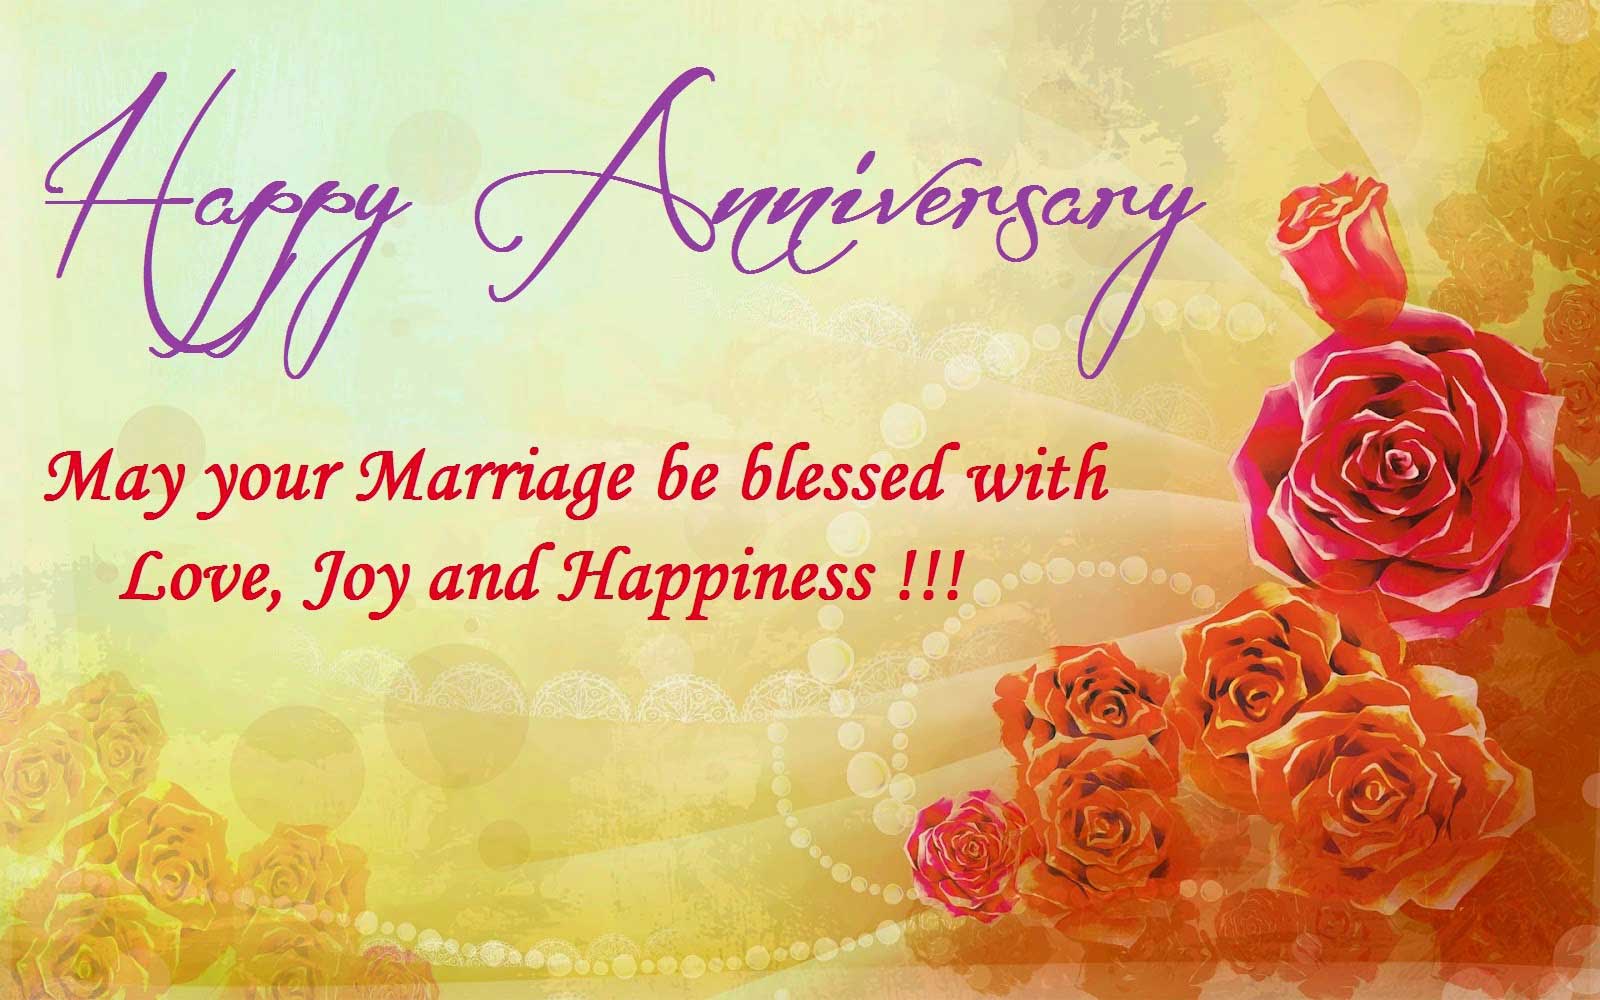 Happy-Wedding-Anniversary-Wishes-For-Husband-Wife